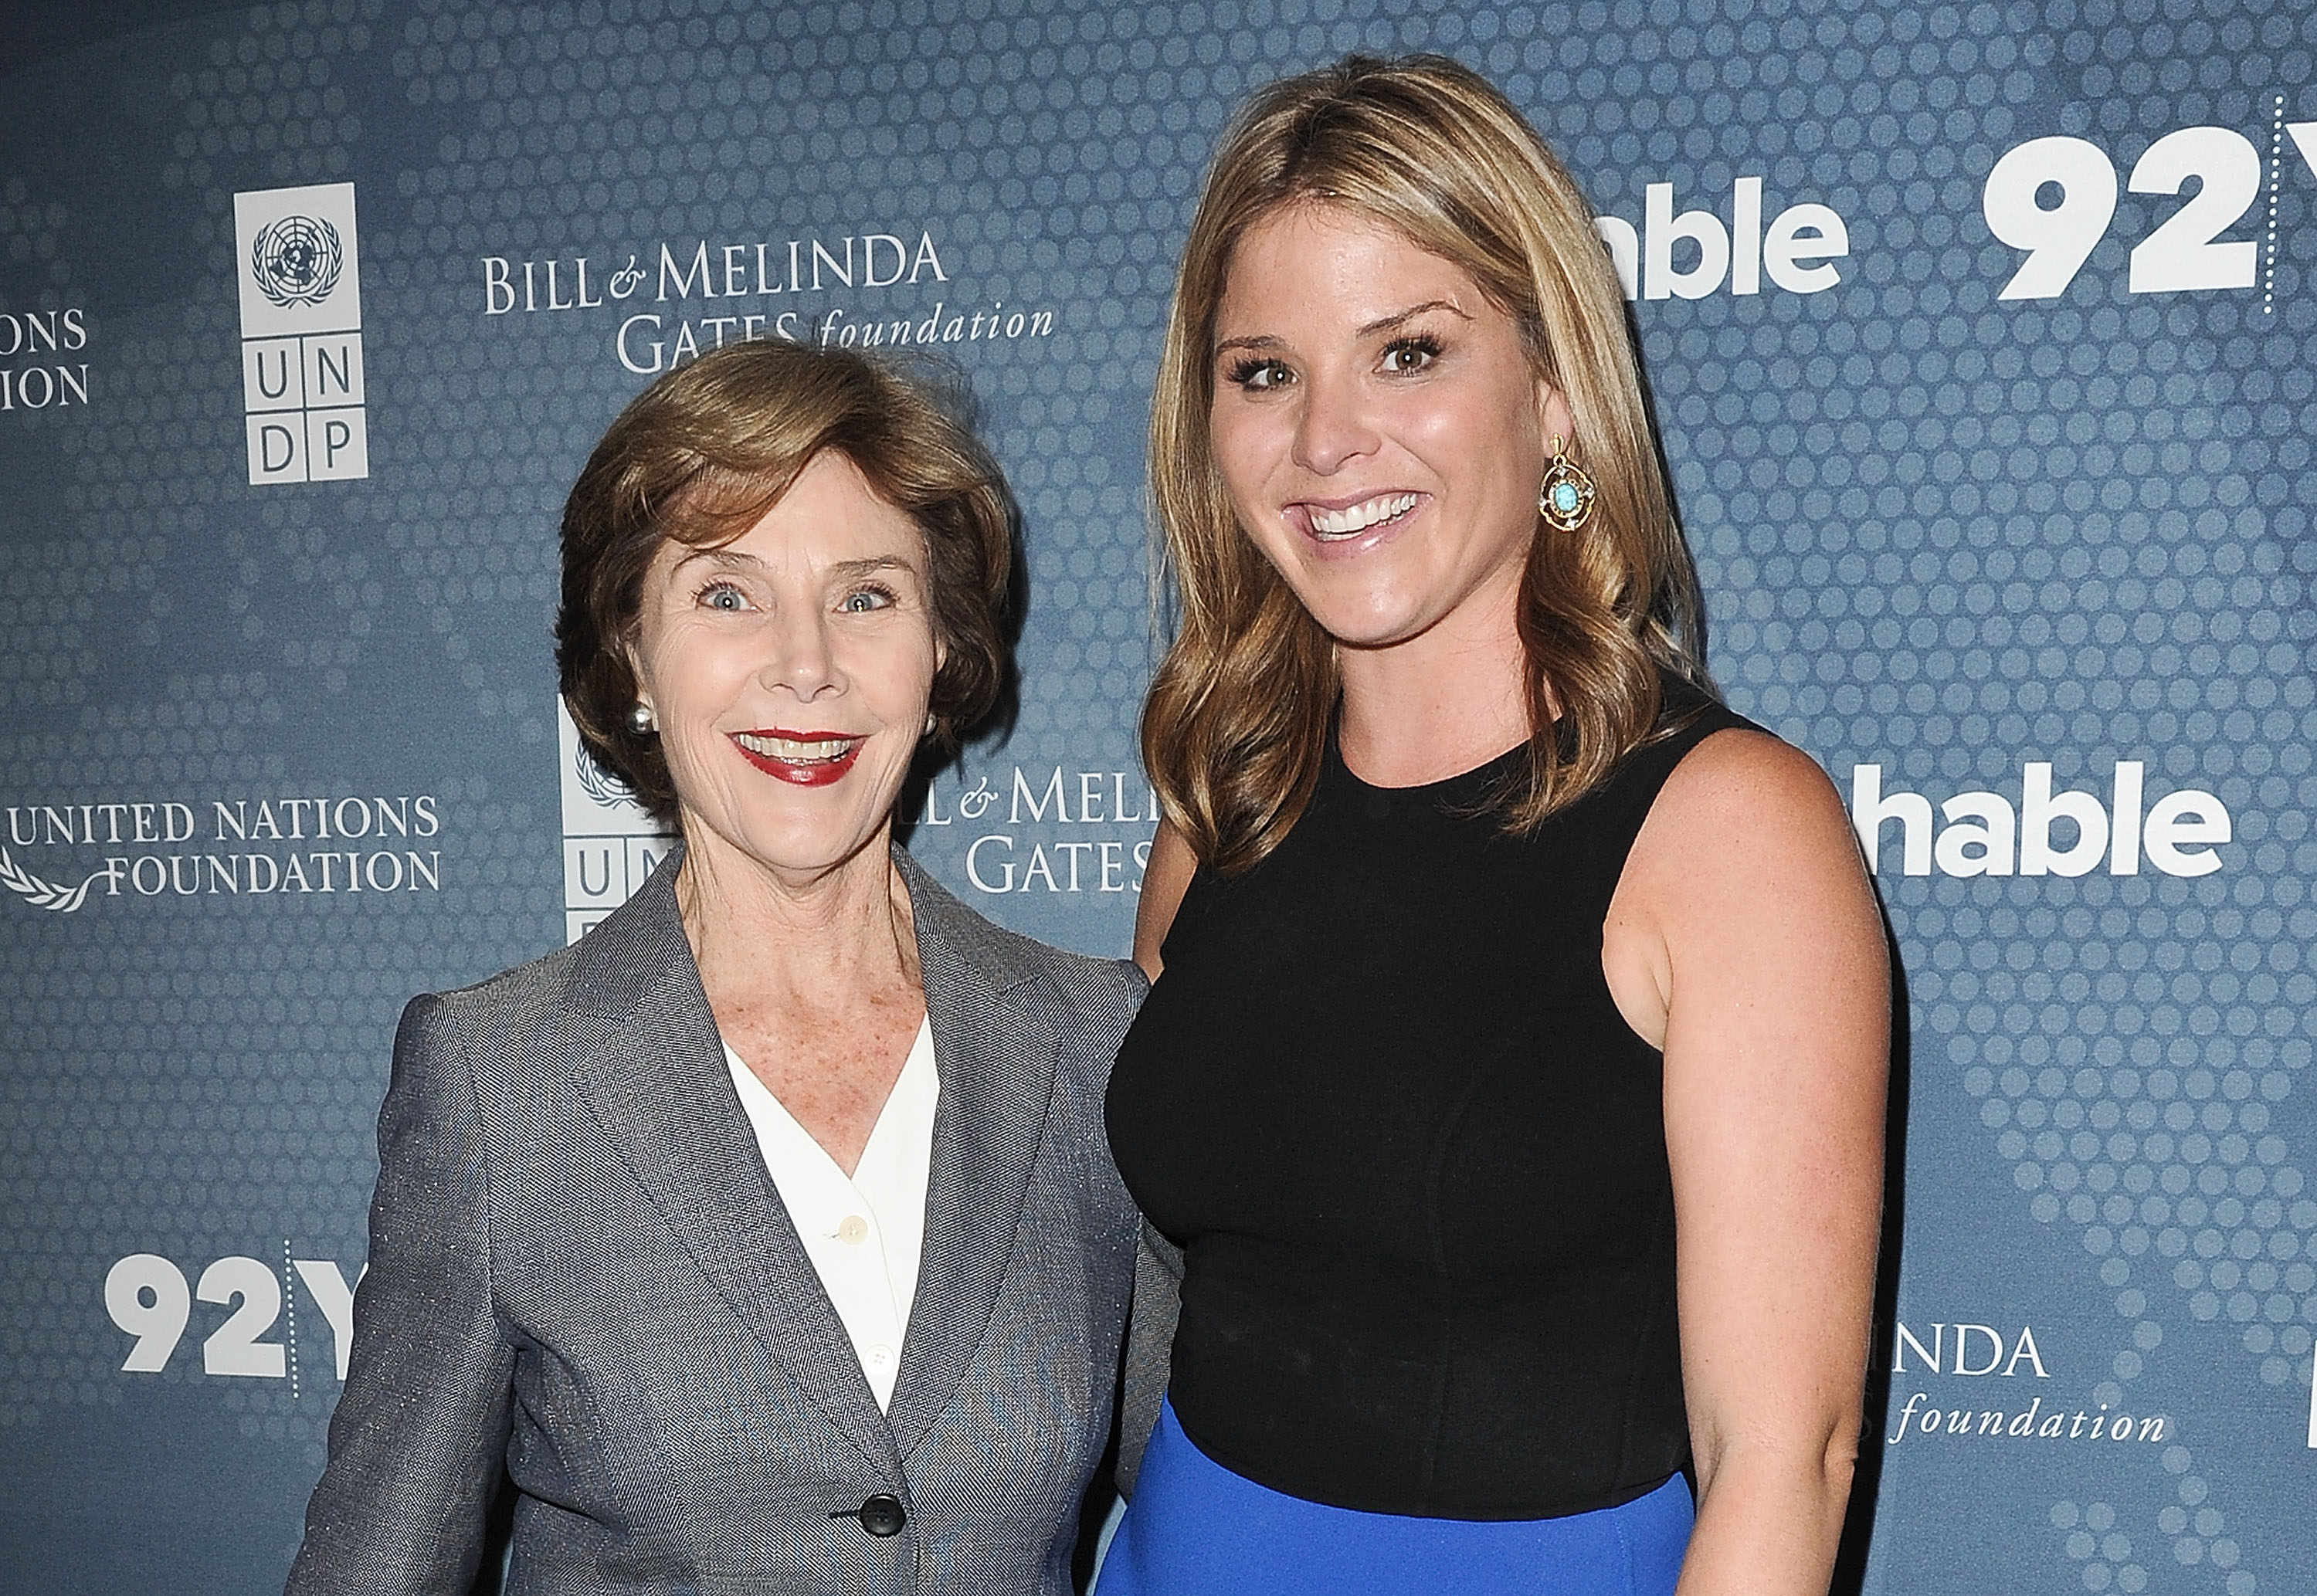 Laura Bush and Jenna Bush Hager attend the 2014 Social Good Summit at 92Y on September 22, 2014 in New York City. (Daniel Zuchnik&mdash;WireImage/Getty Images)